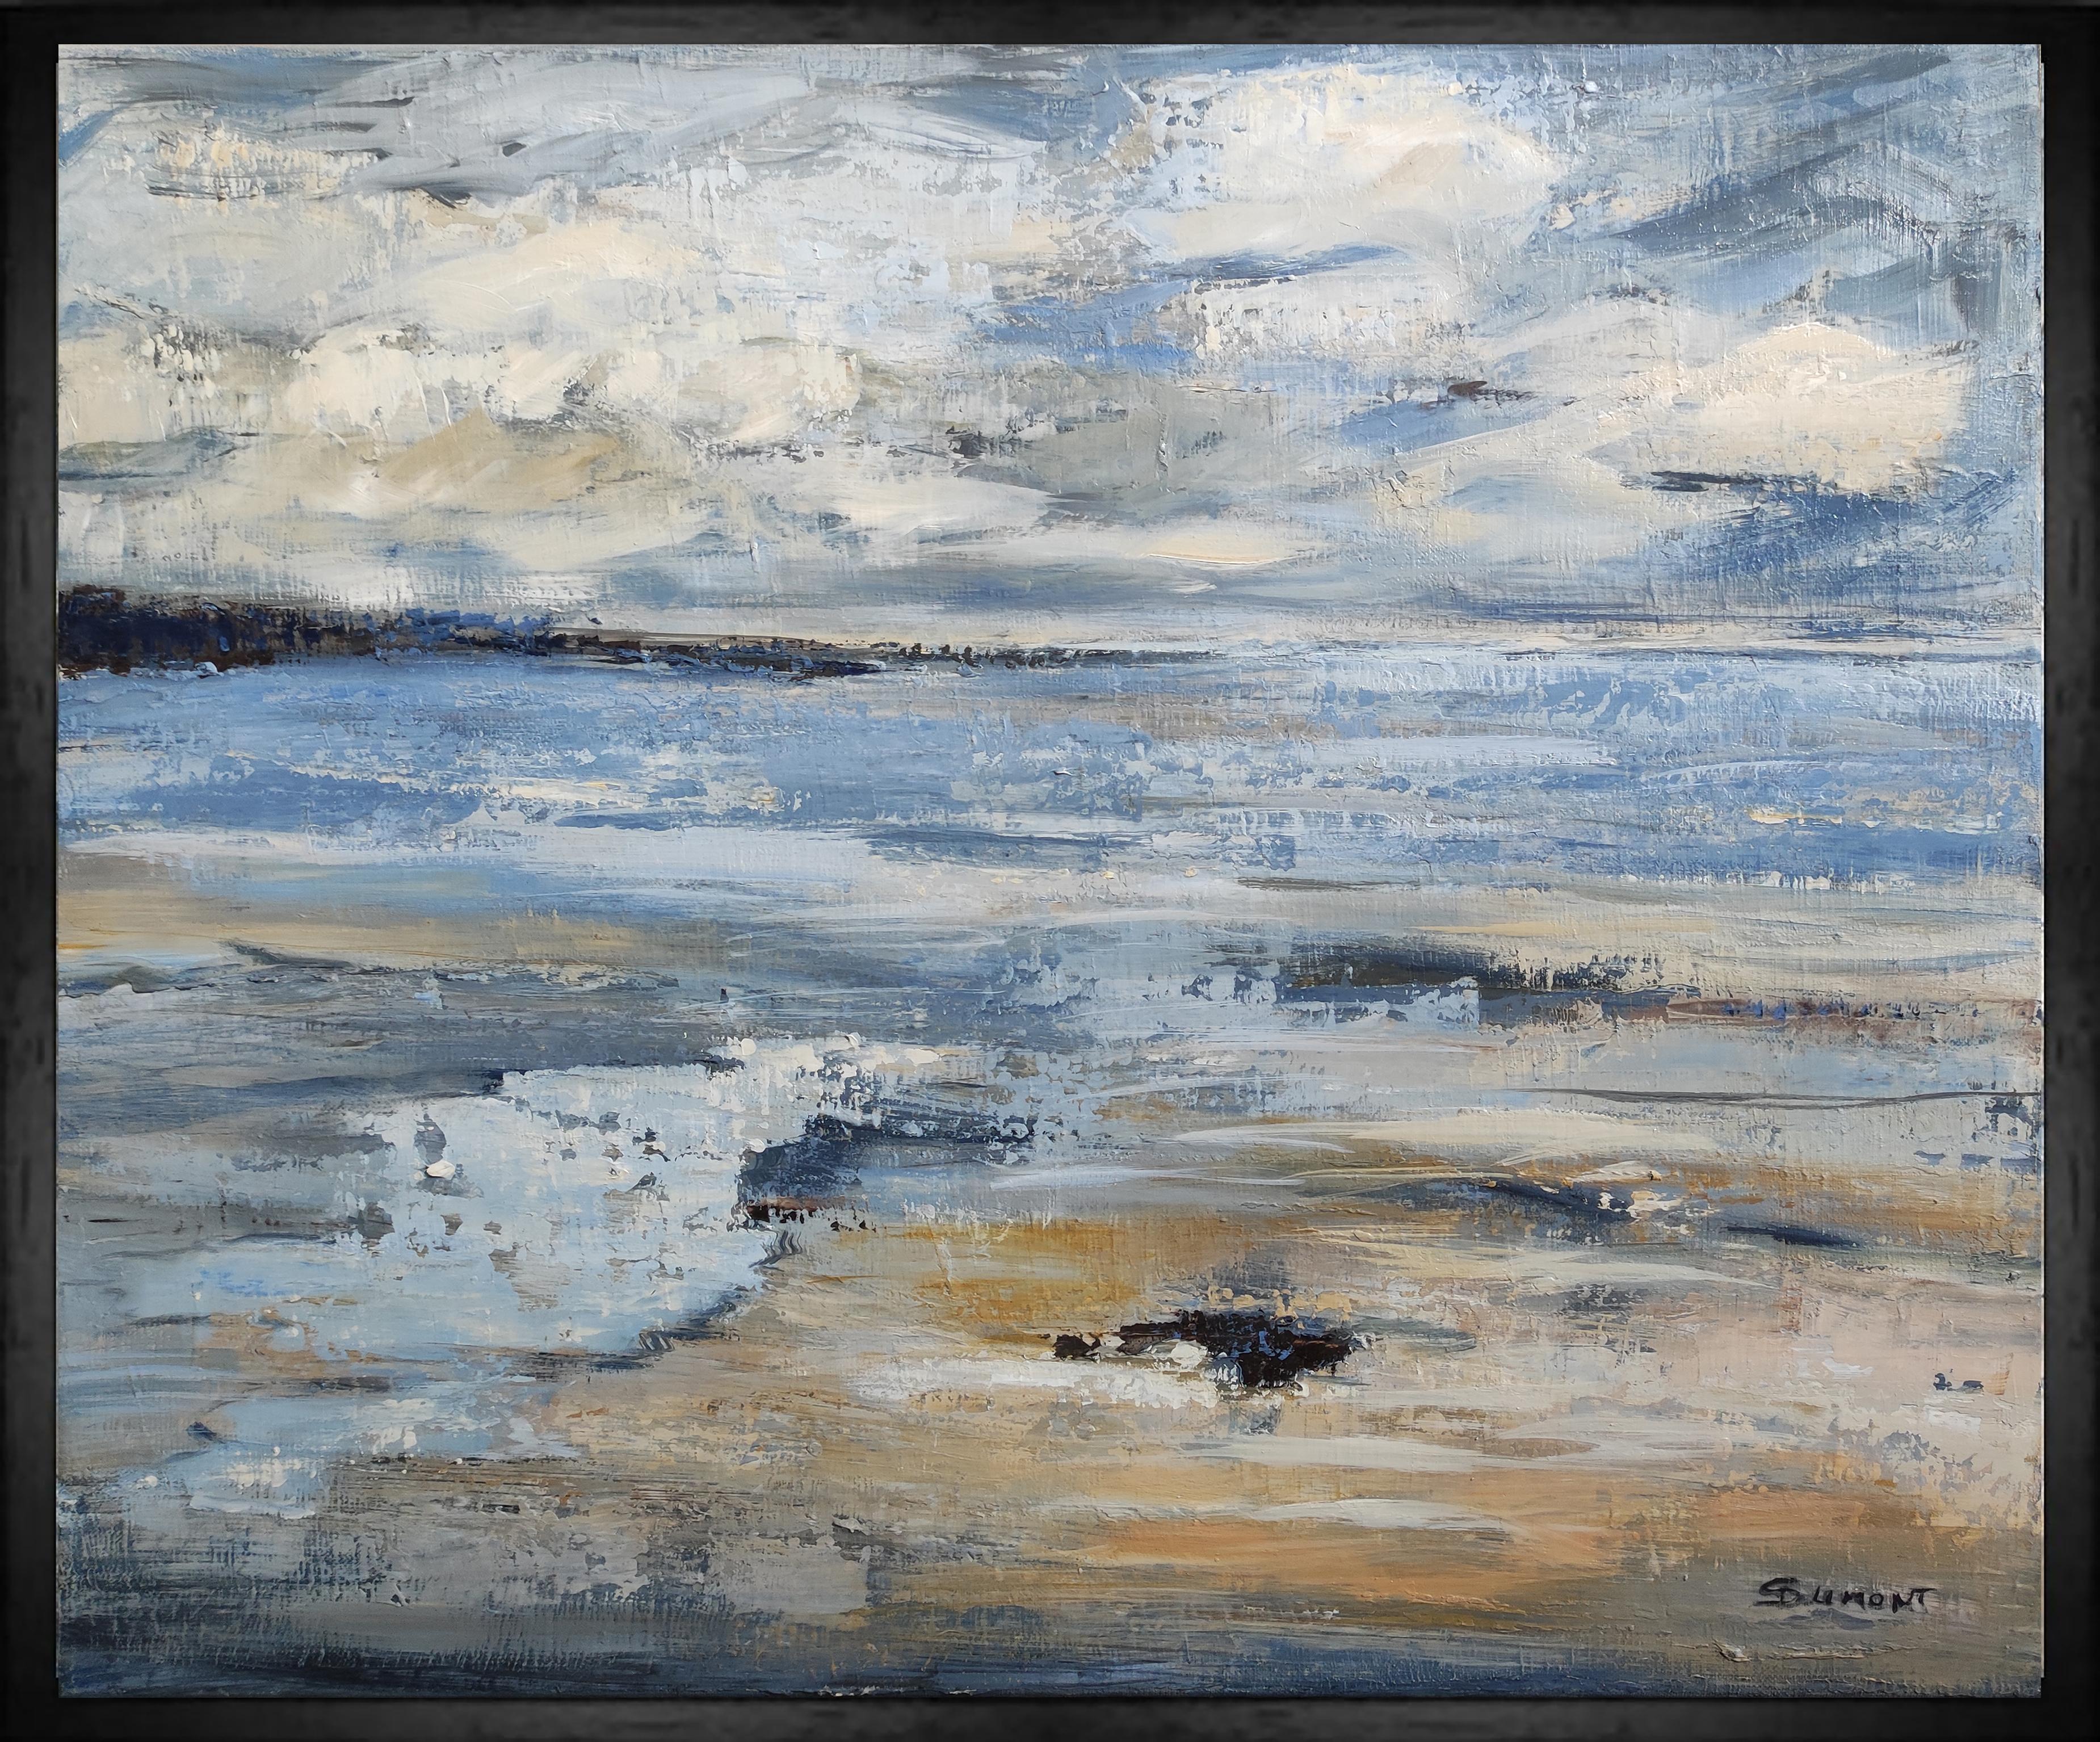 seascape, blue seaside, semi abstract, oil on canvas, sky, expressionism